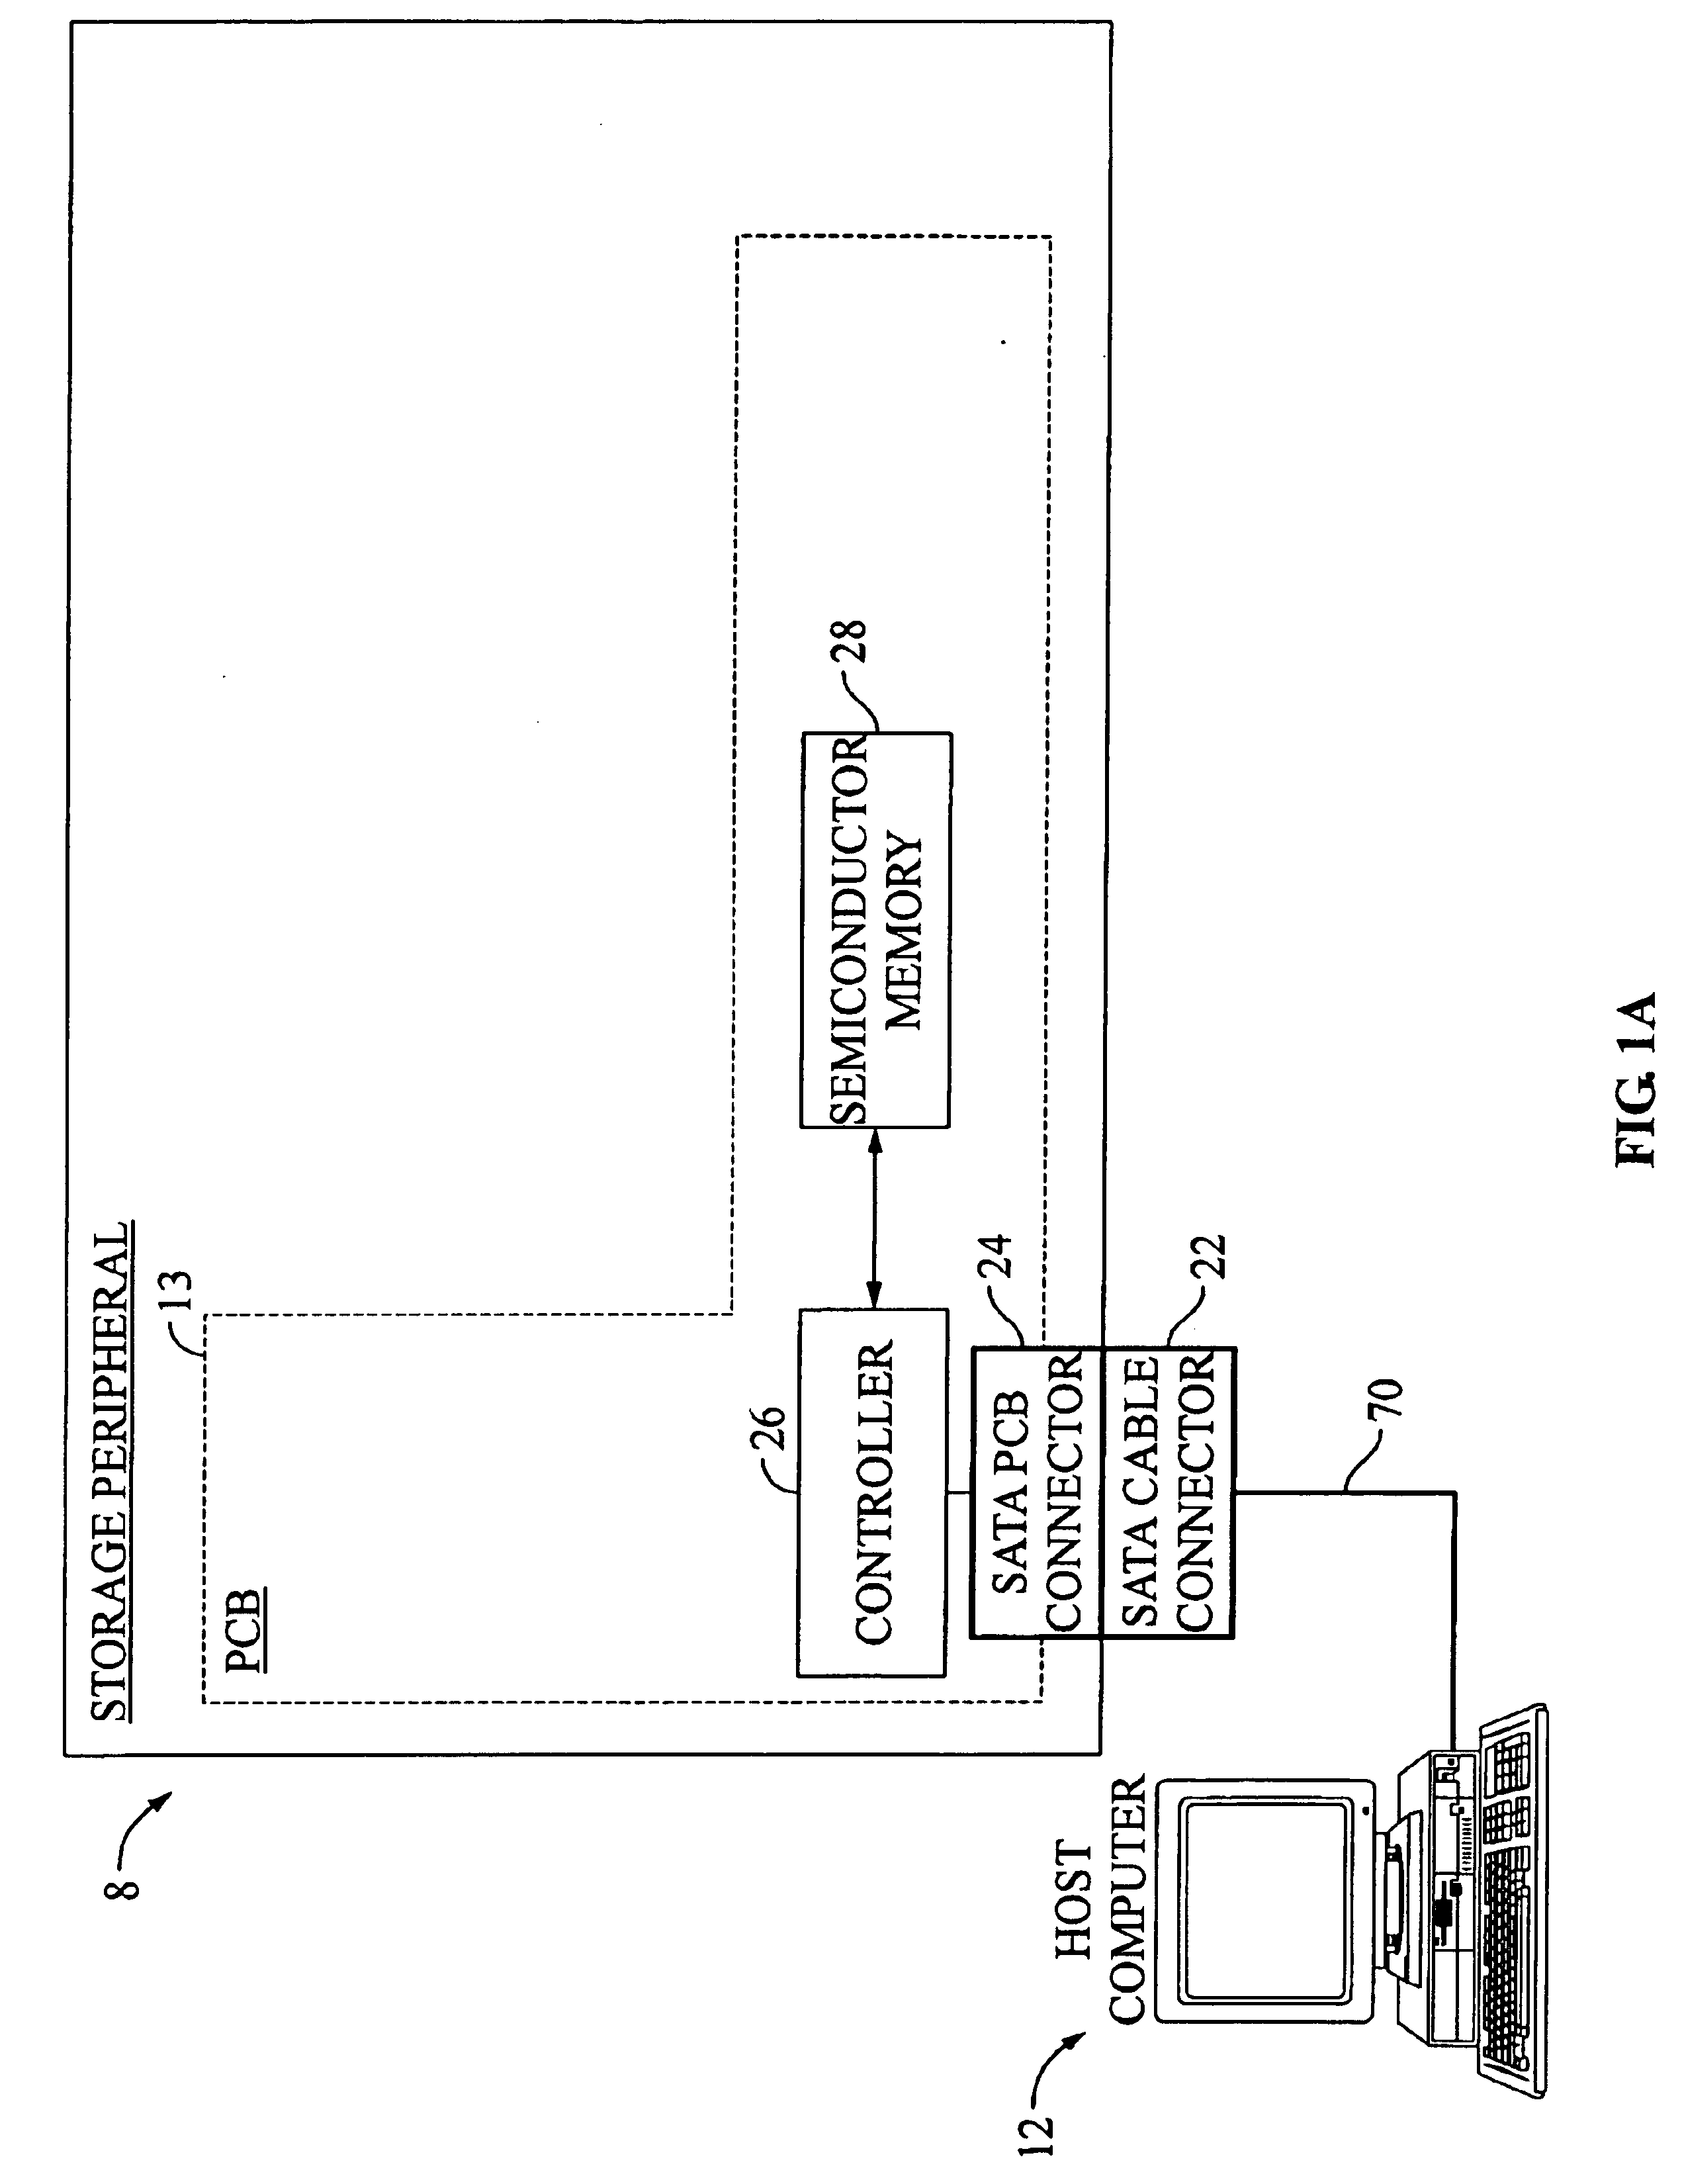 Storage peripheral having a robust serial advanced technology attachment (SATA) PCB connector